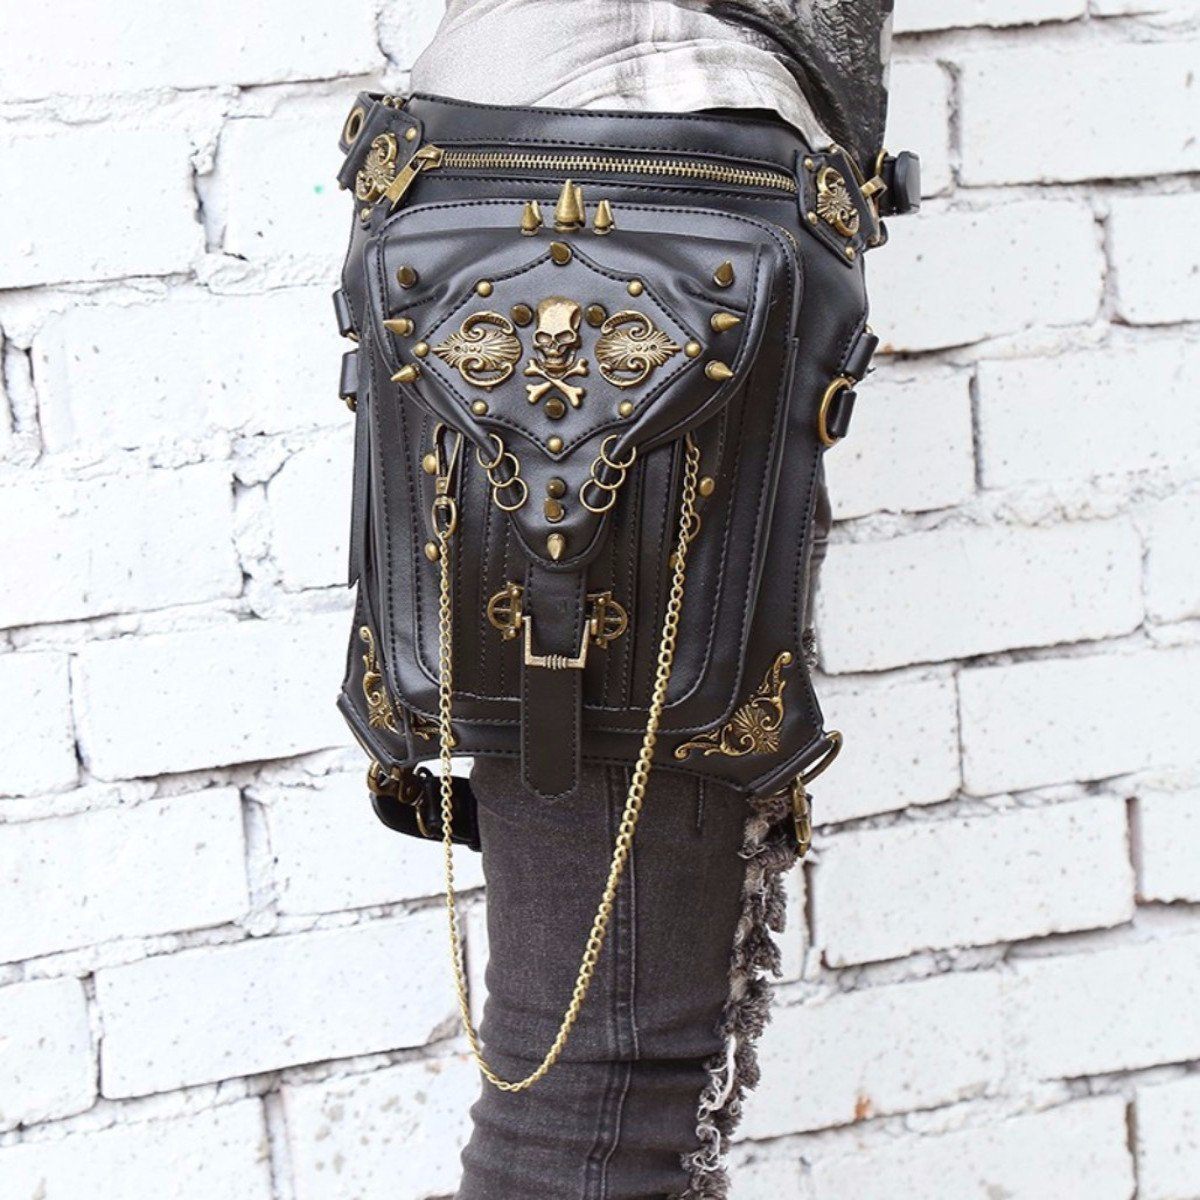 Steampunk-inspired skull bag with intricate metal details.